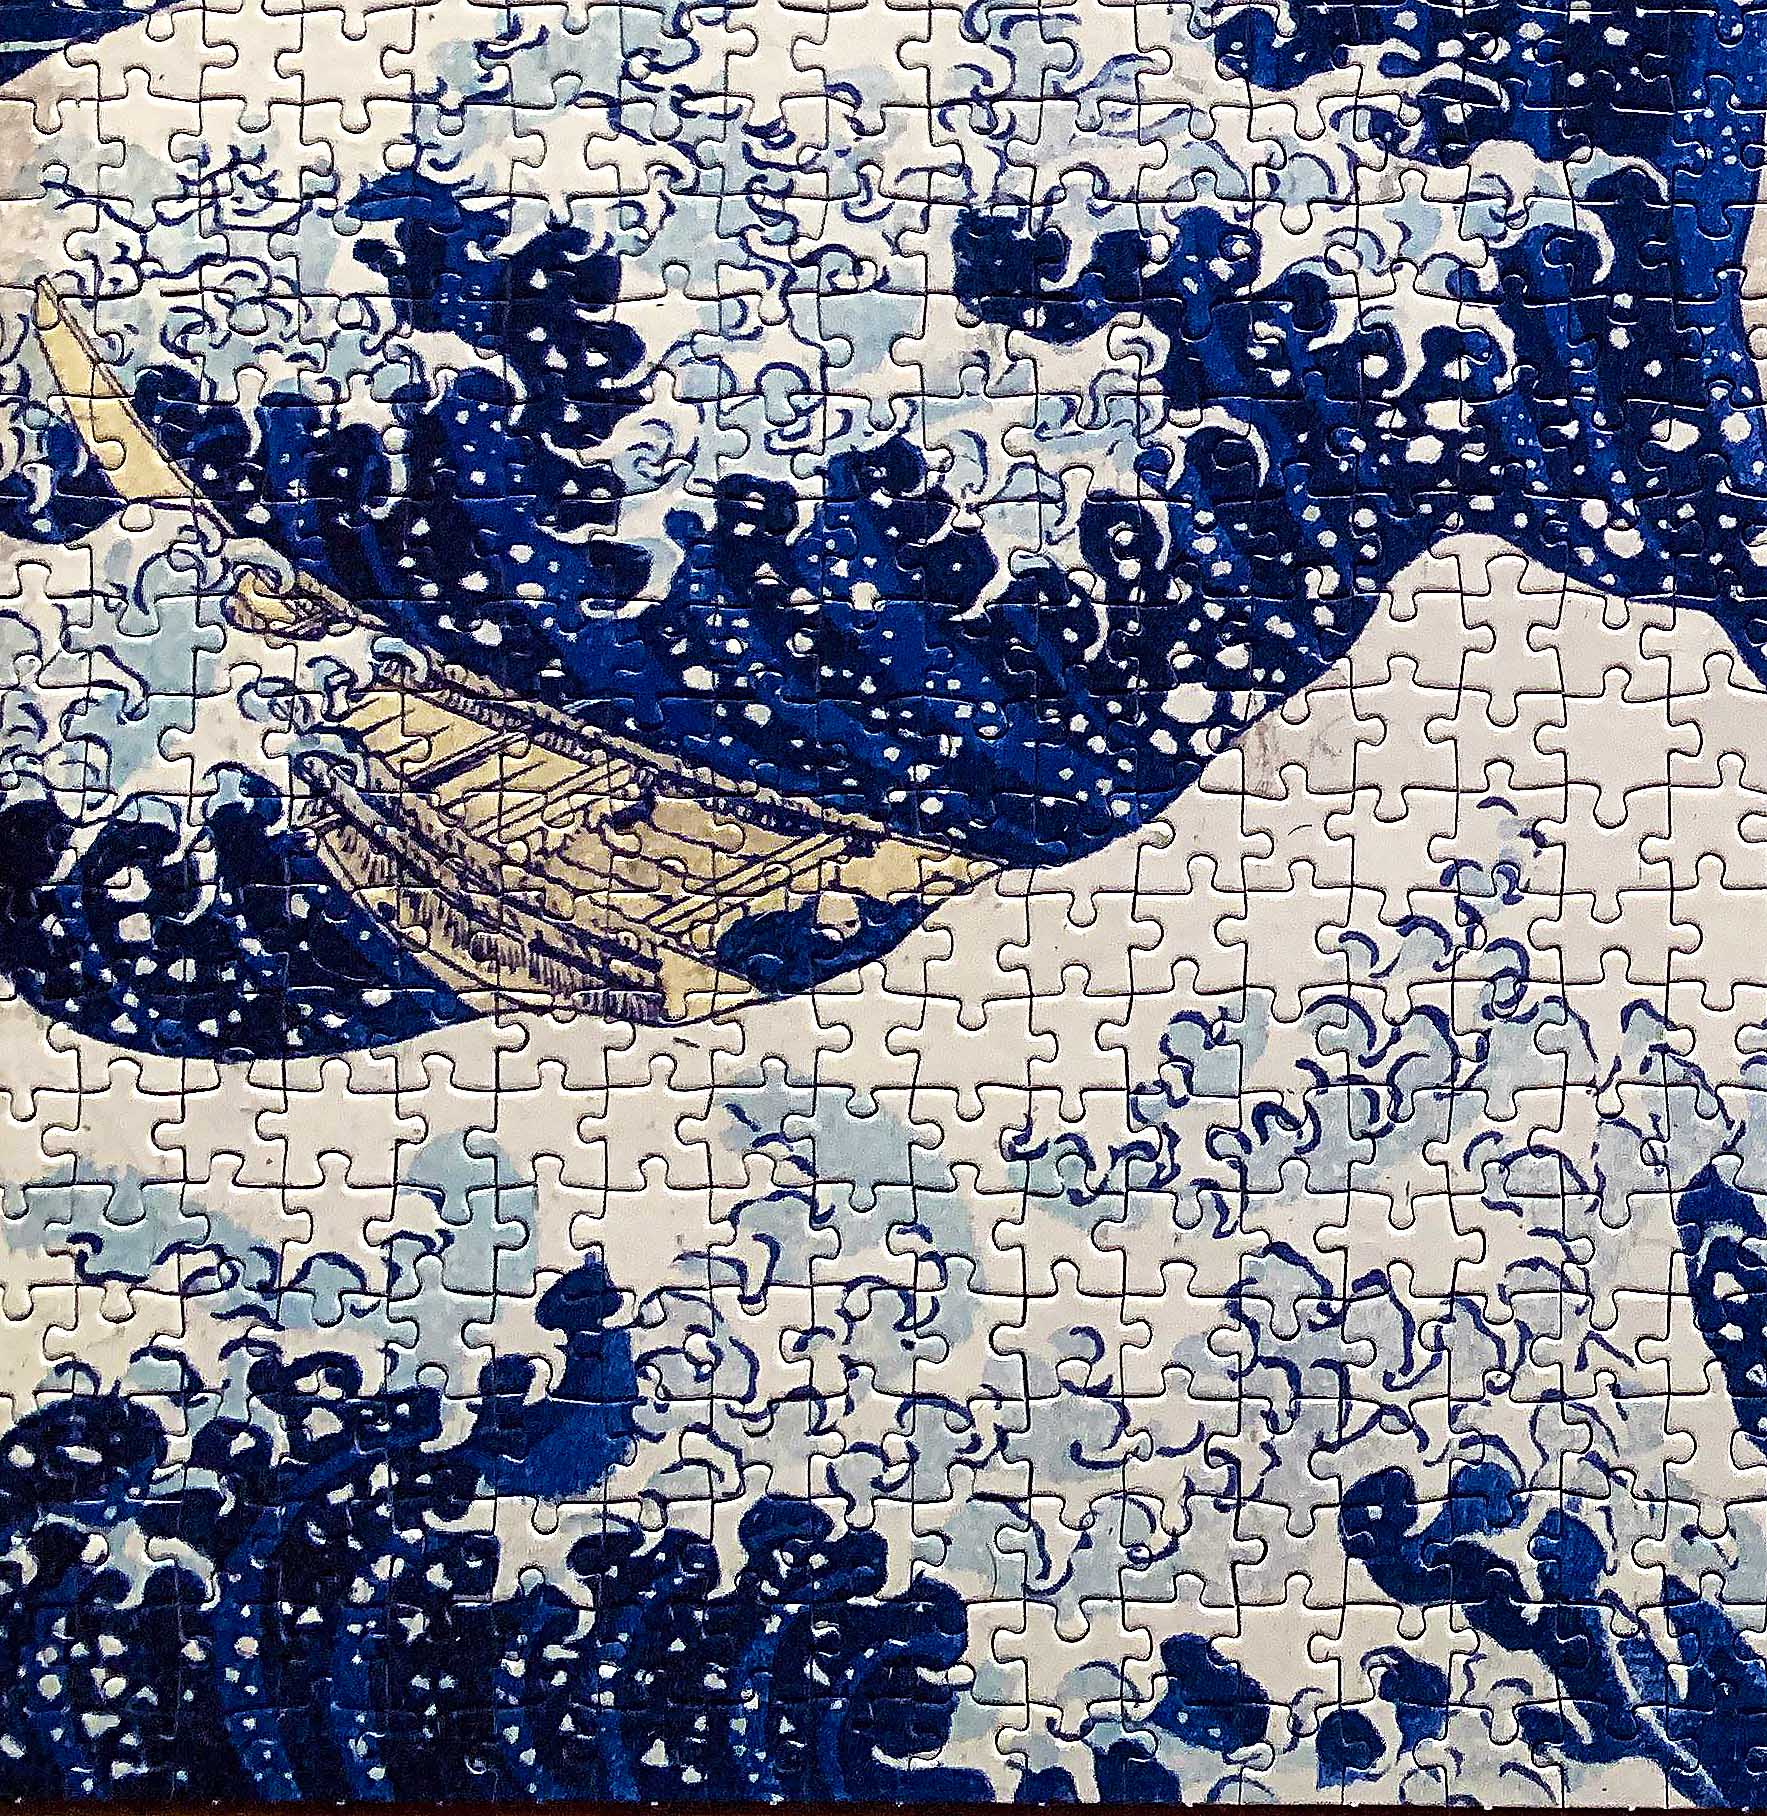 Hokusai's 'The Great Wave' jigsaw puzzle is beautiful and challenging. You should frame this brain training game once solved.